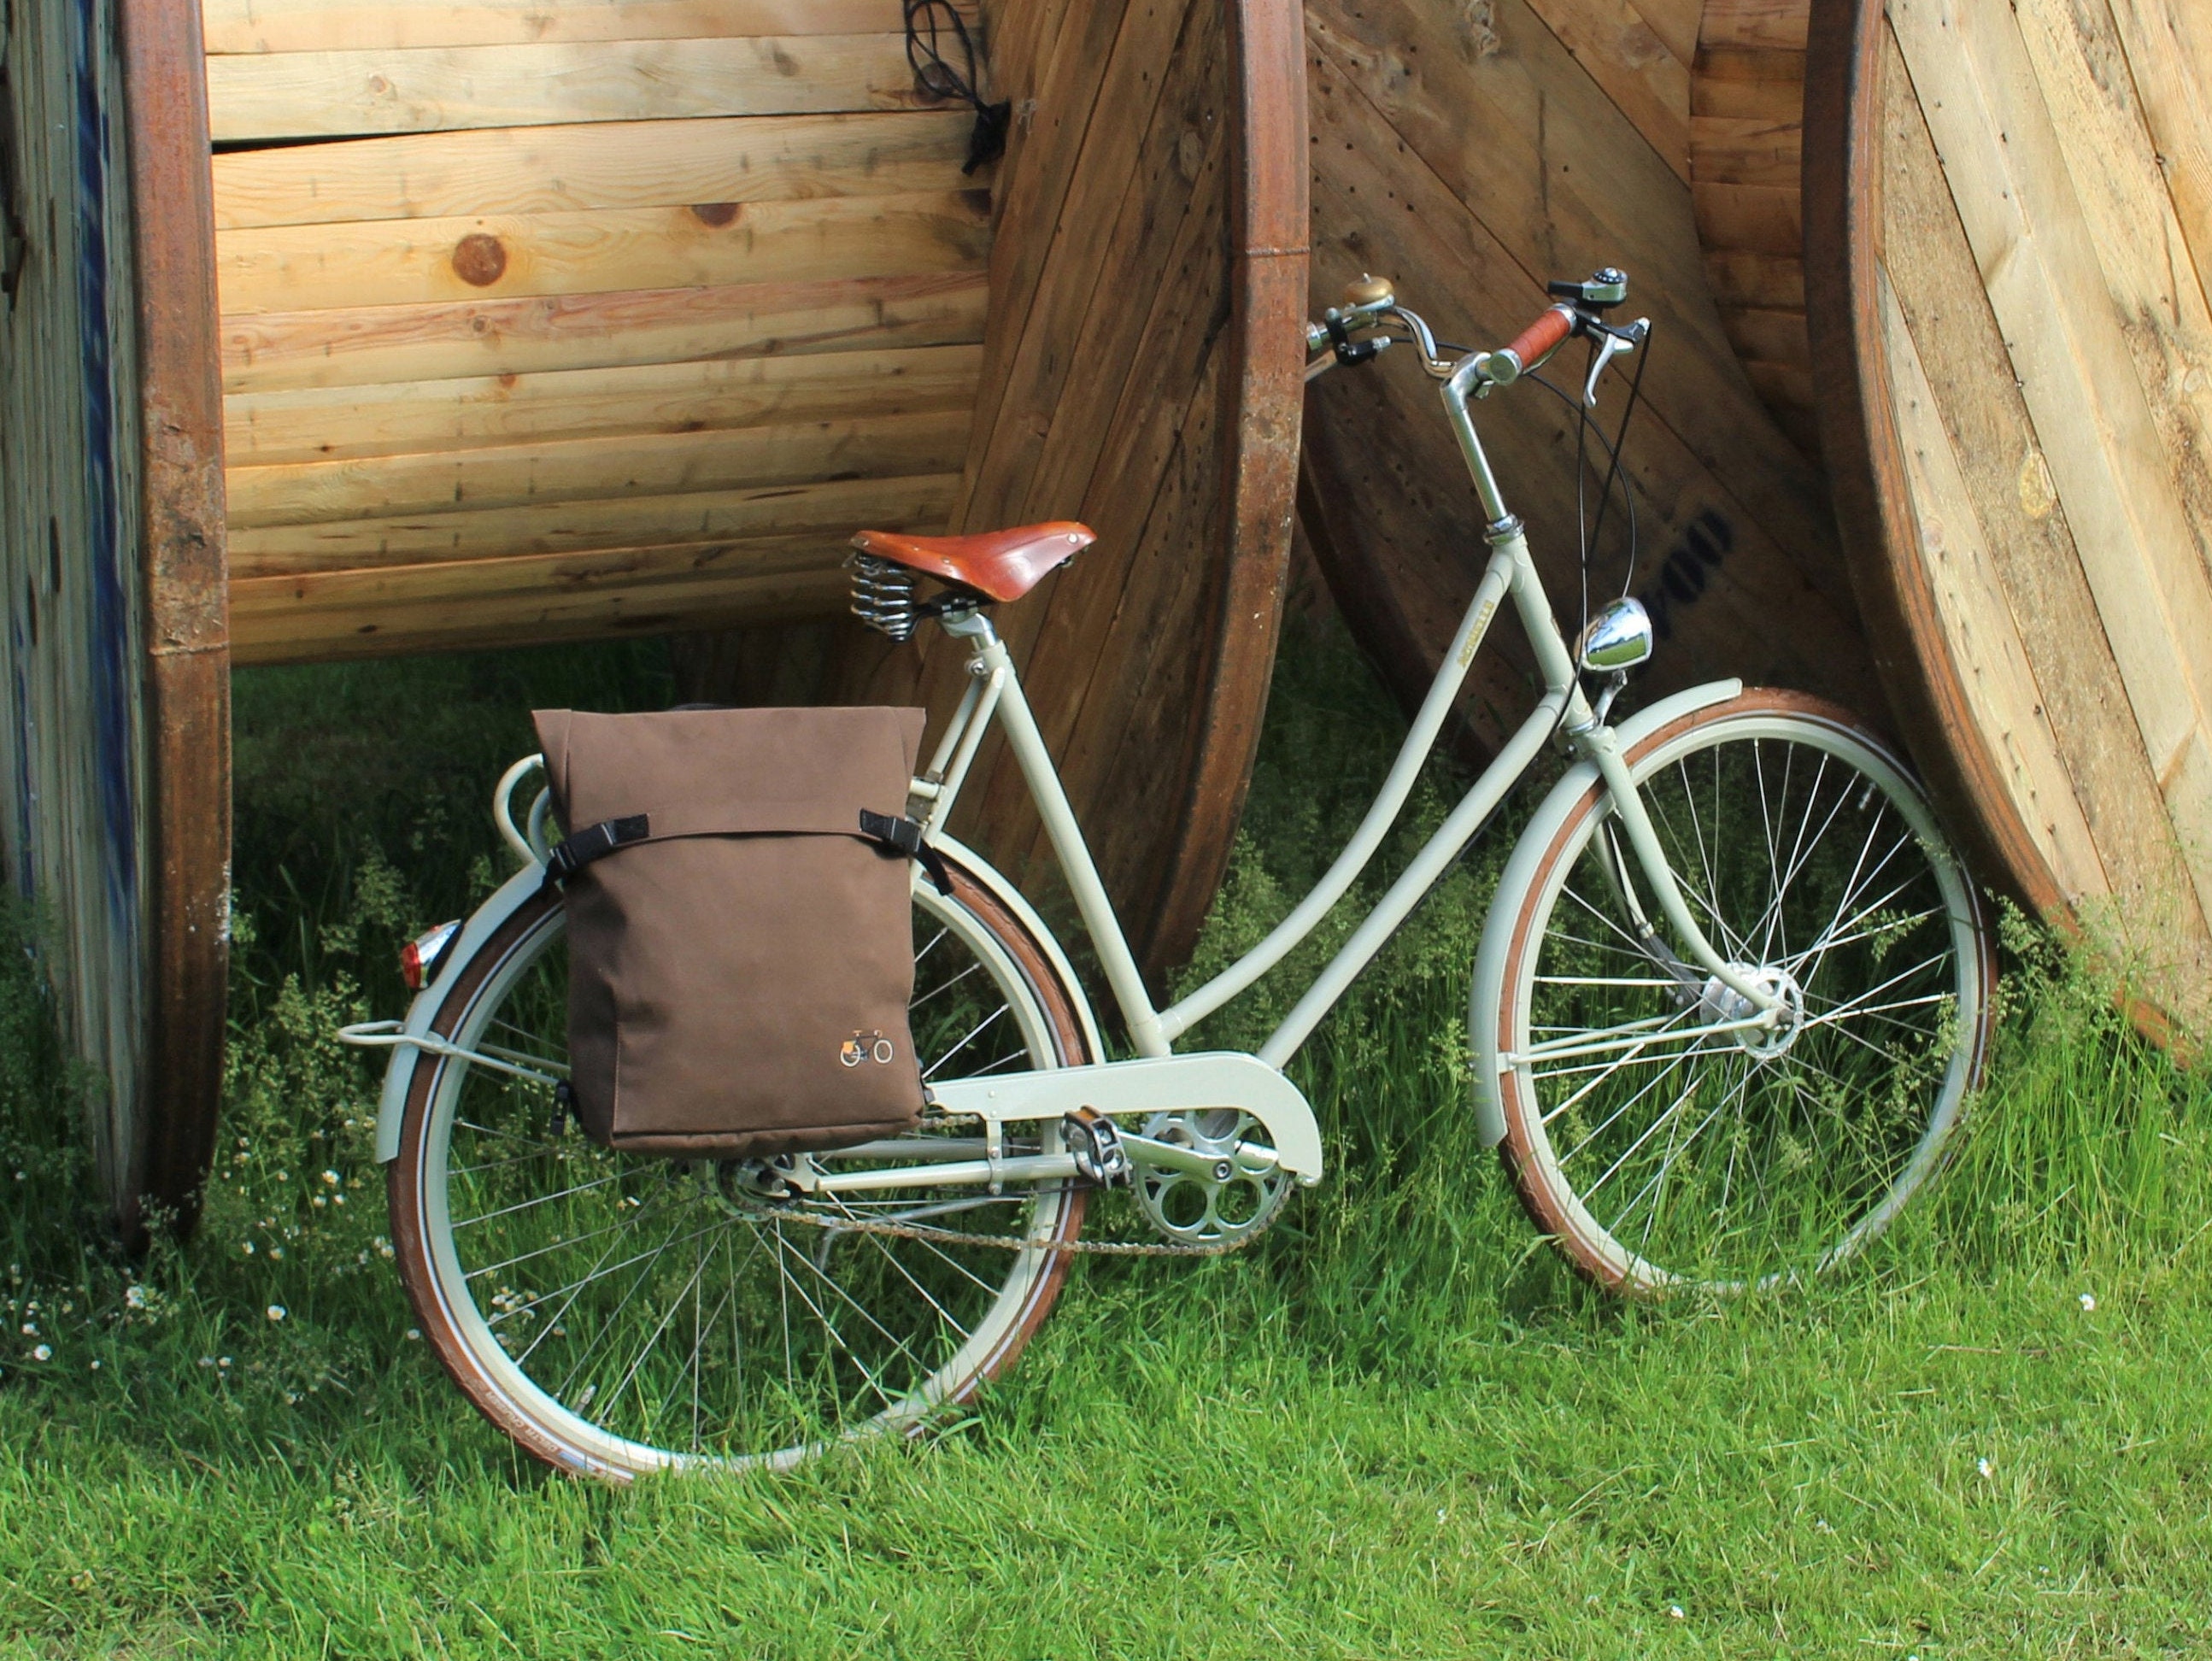 Unisex Backpack For Cyclists And Waterproof Rear Bikebag In Etsy Norway